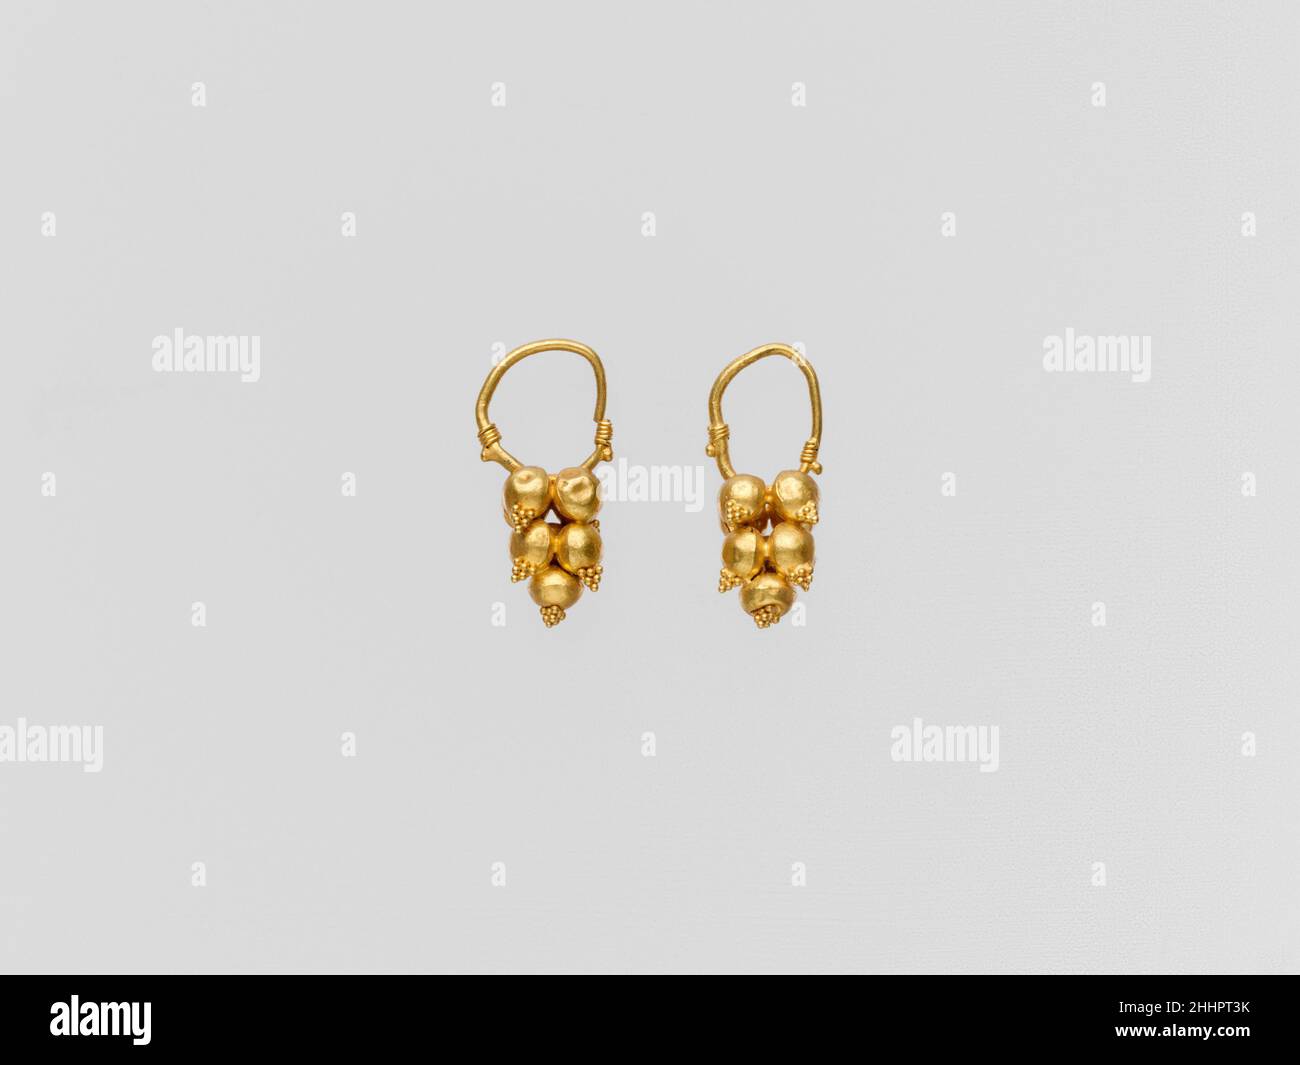 Gold earring with clustered spheres and pyramidal granulation 2nd–3rd century A.D. Roman Gold earrings with mulberry ornament.. Gold earring with clustered spheres and pyramidal granulation. Roman. 2nd–3rd century A.D.. Gold. Imperial. Gold and Silver Stock Photo